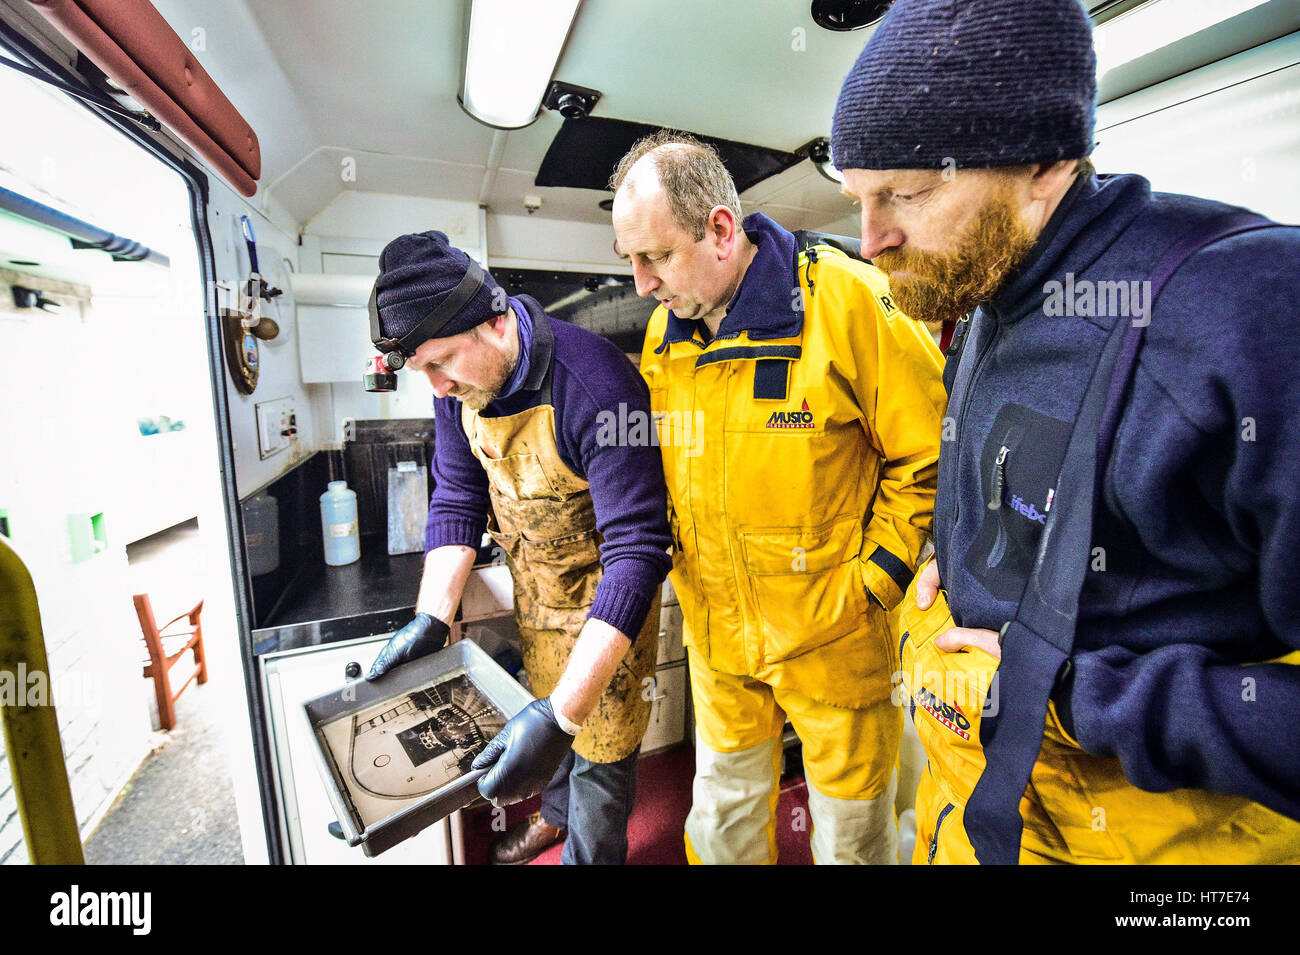 Photographer Jack Lowe, shows lifeboat crews a Victorian glass plate photograph he developed in his mobile darkroom, a decommissioned NHS ambulance, which he uses to travel with his Victorian glass plate camera in his mission to capture all 237 RNLI lifeboat stations in the UK and Ireland for the The Lifeboat Station Project. Stock Photo